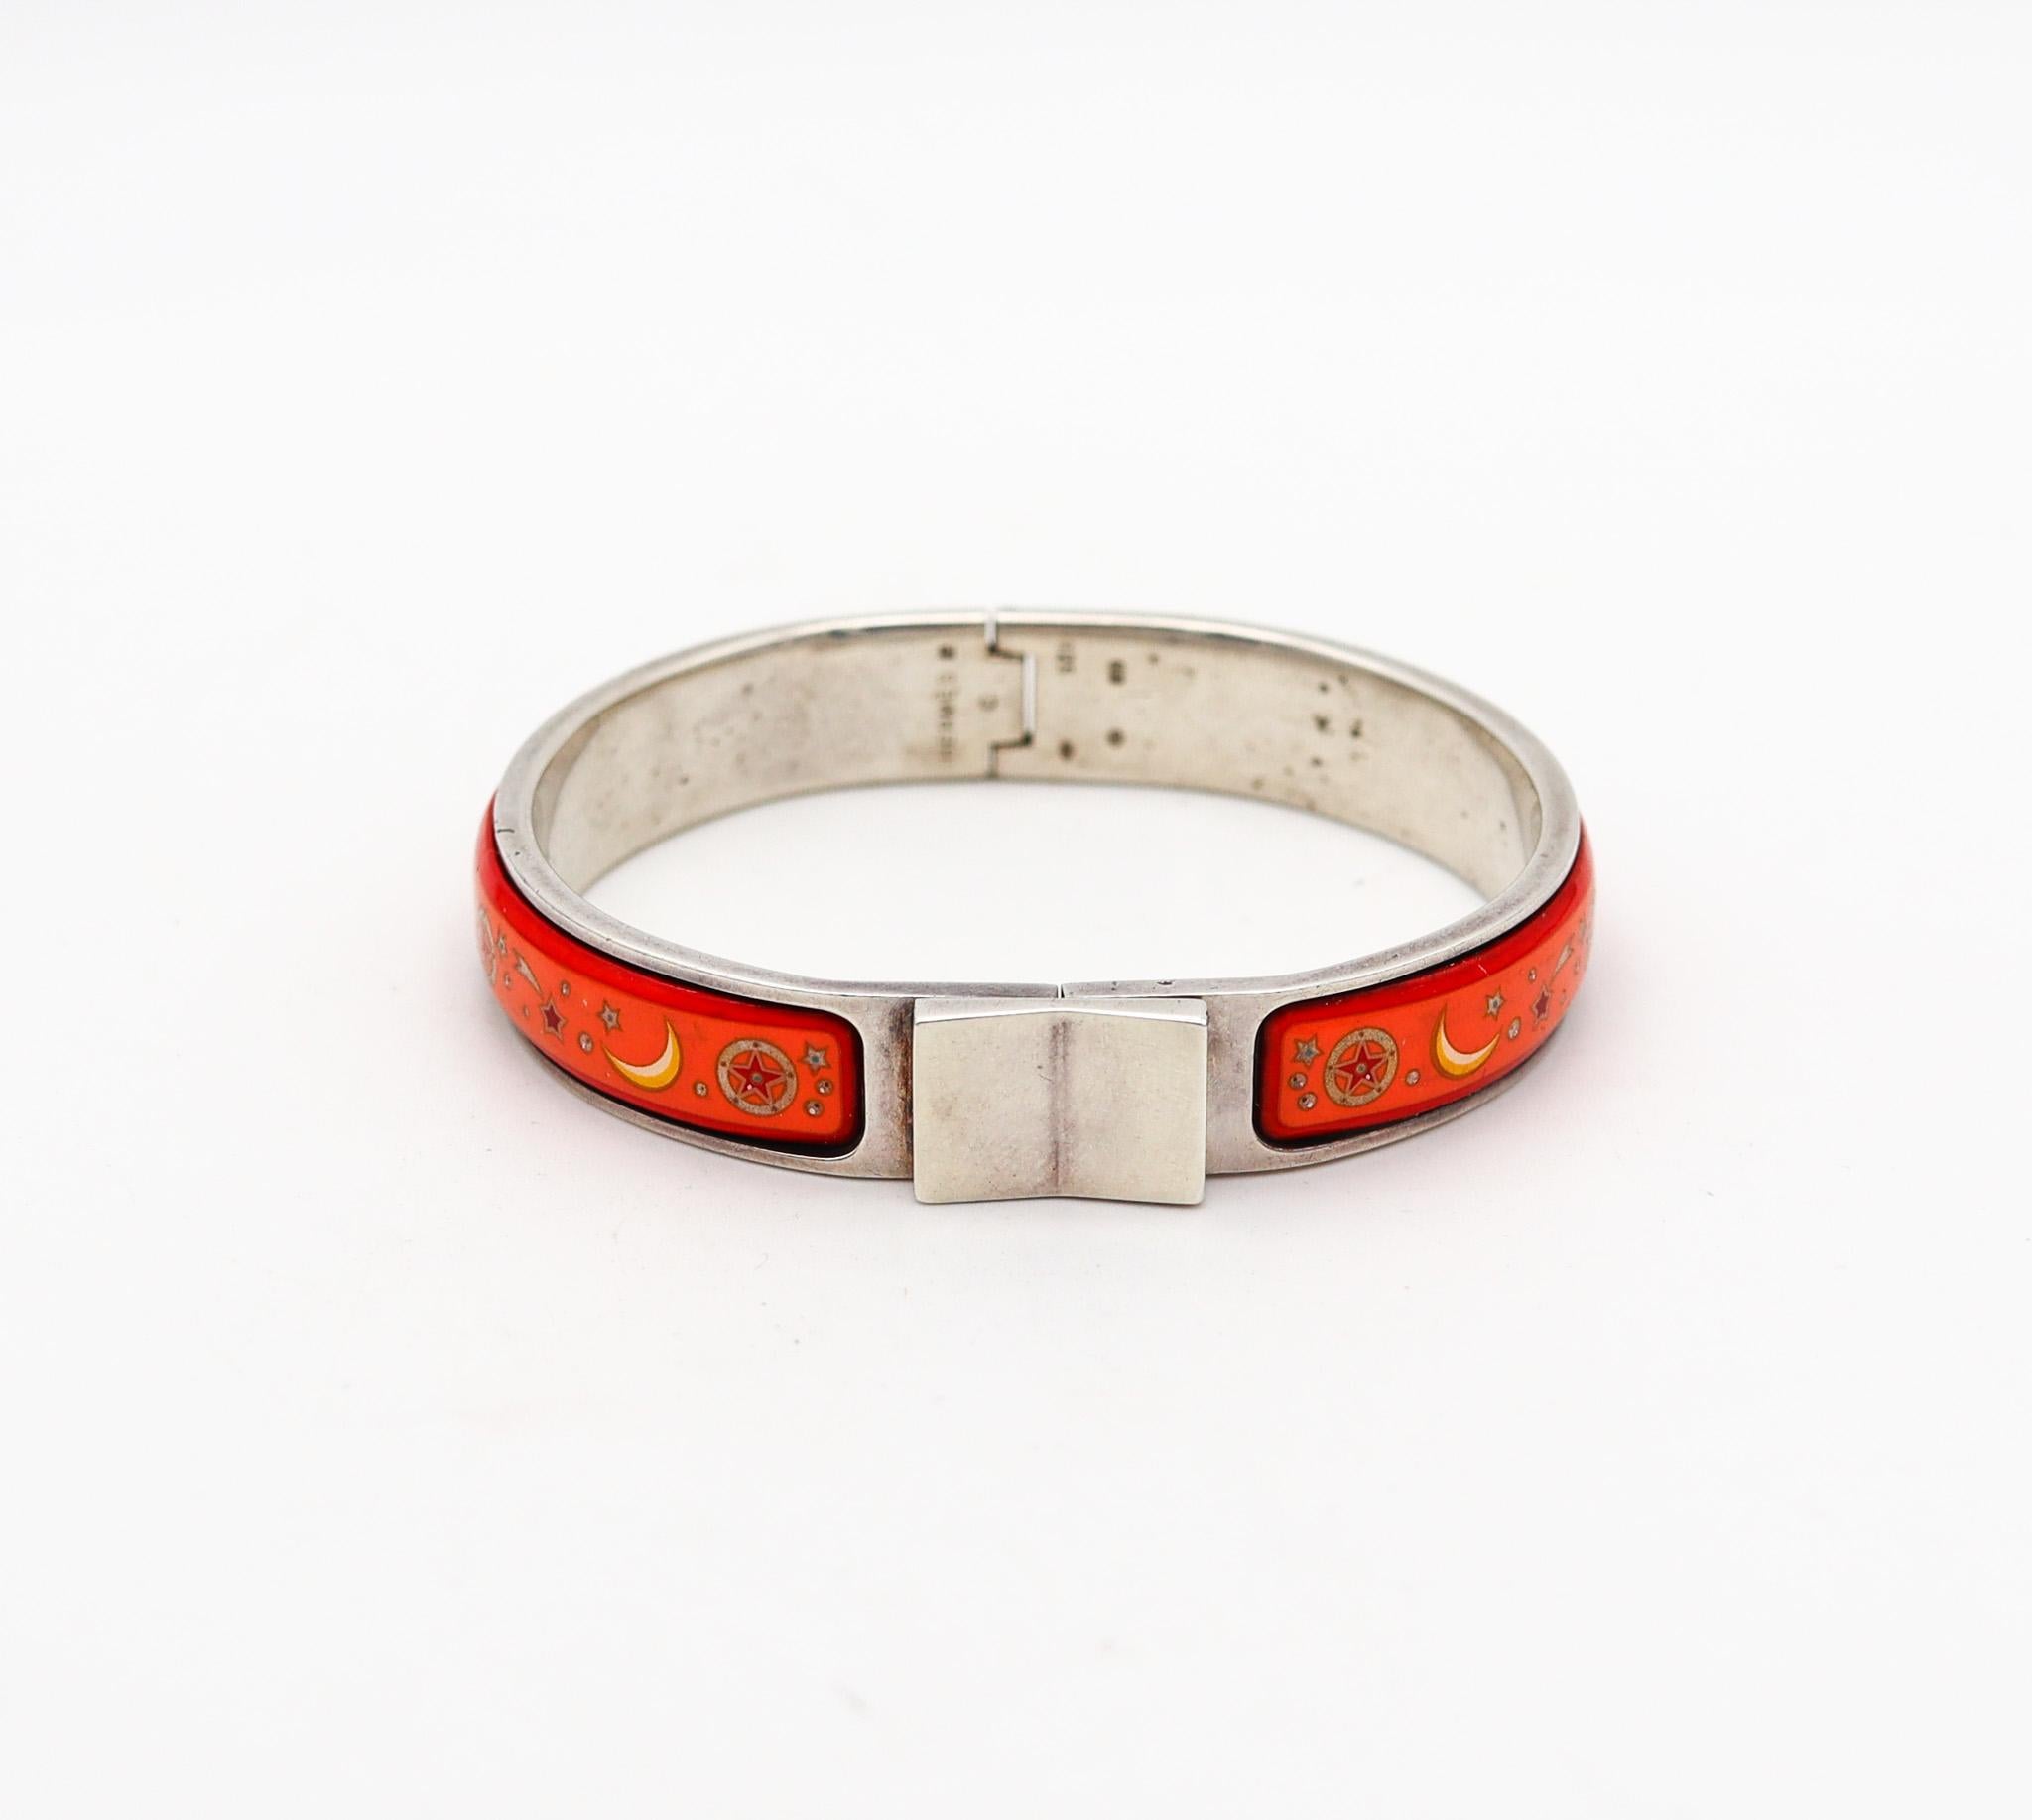 Hermes Paris 1990 Clic Clac Armreif Armband in .925 Sterling Silber mit Emaille (Modernistisch) im Angebot